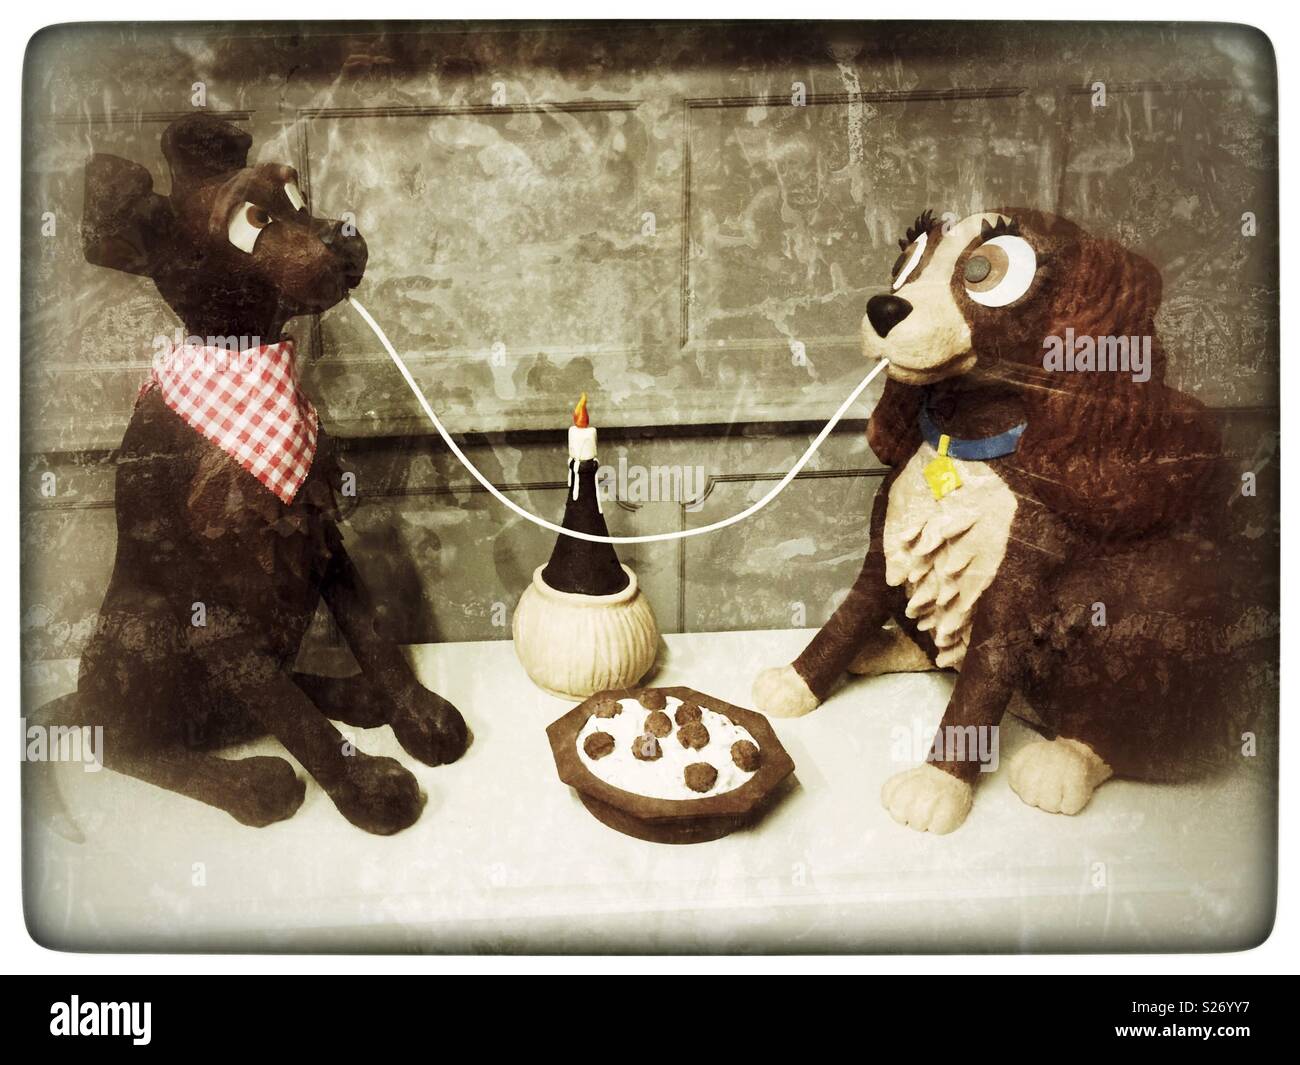 Lady and The Tramp entirely made of Chocolate on display at the Chocolate Factory in Bruges, Belgium. Stock Photo